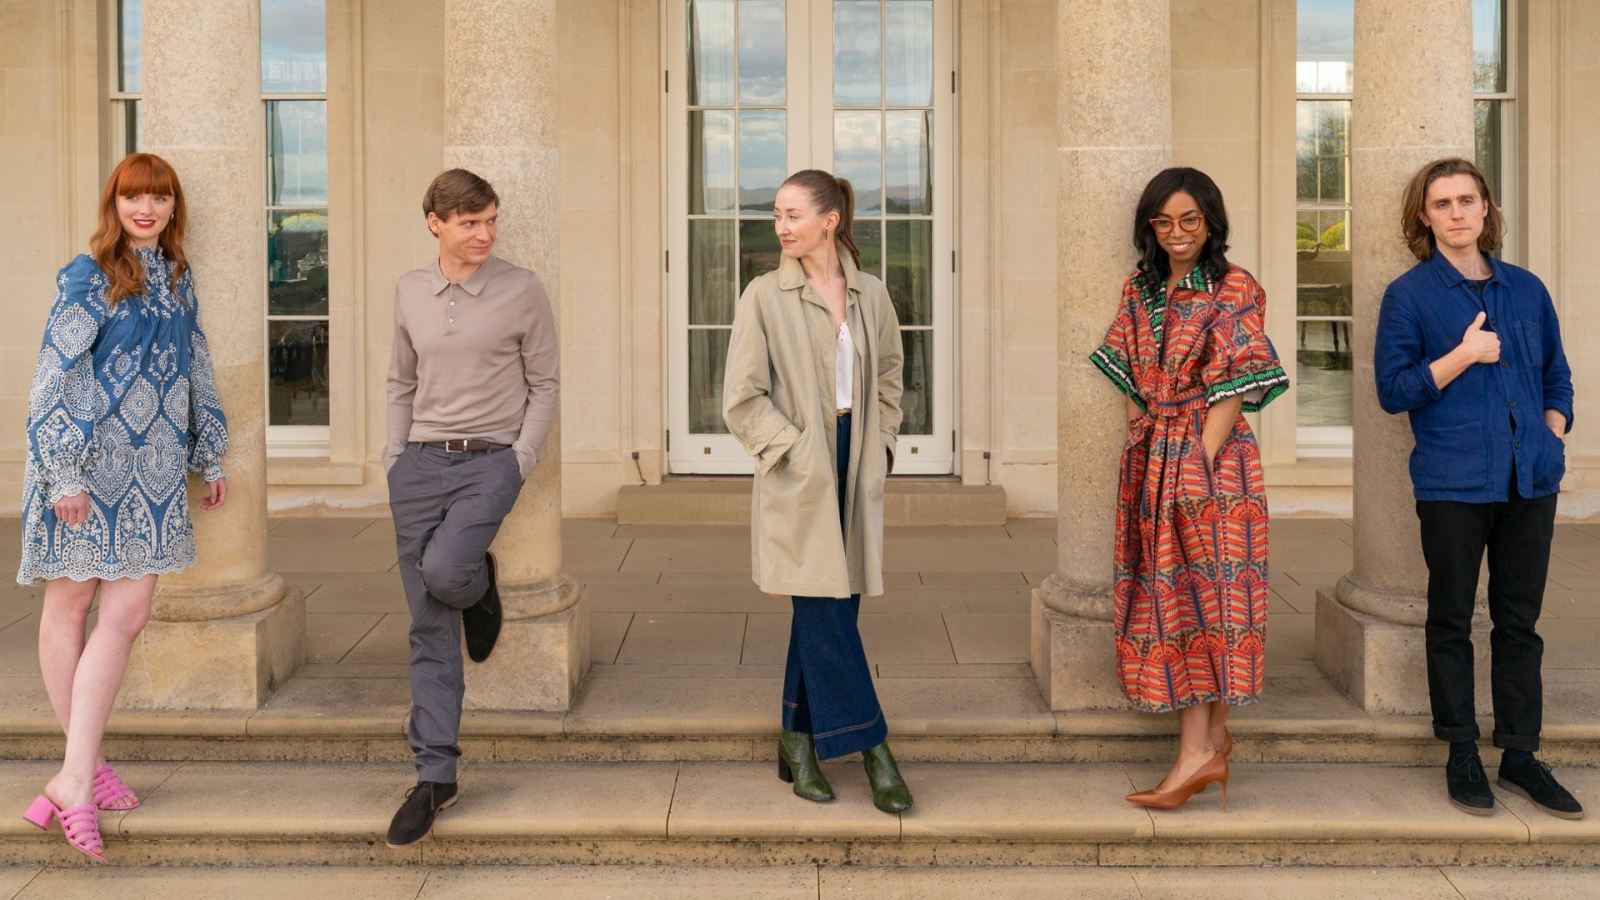 First look: (L-R) Poppy Gilbert as Chloe, Billy Howle as Elliot, Erin Doherty as Becky, Pippa Bennett-Warner as Livia, and Jack Farthing as Richard (image courtesy BBC / York Tillyer)